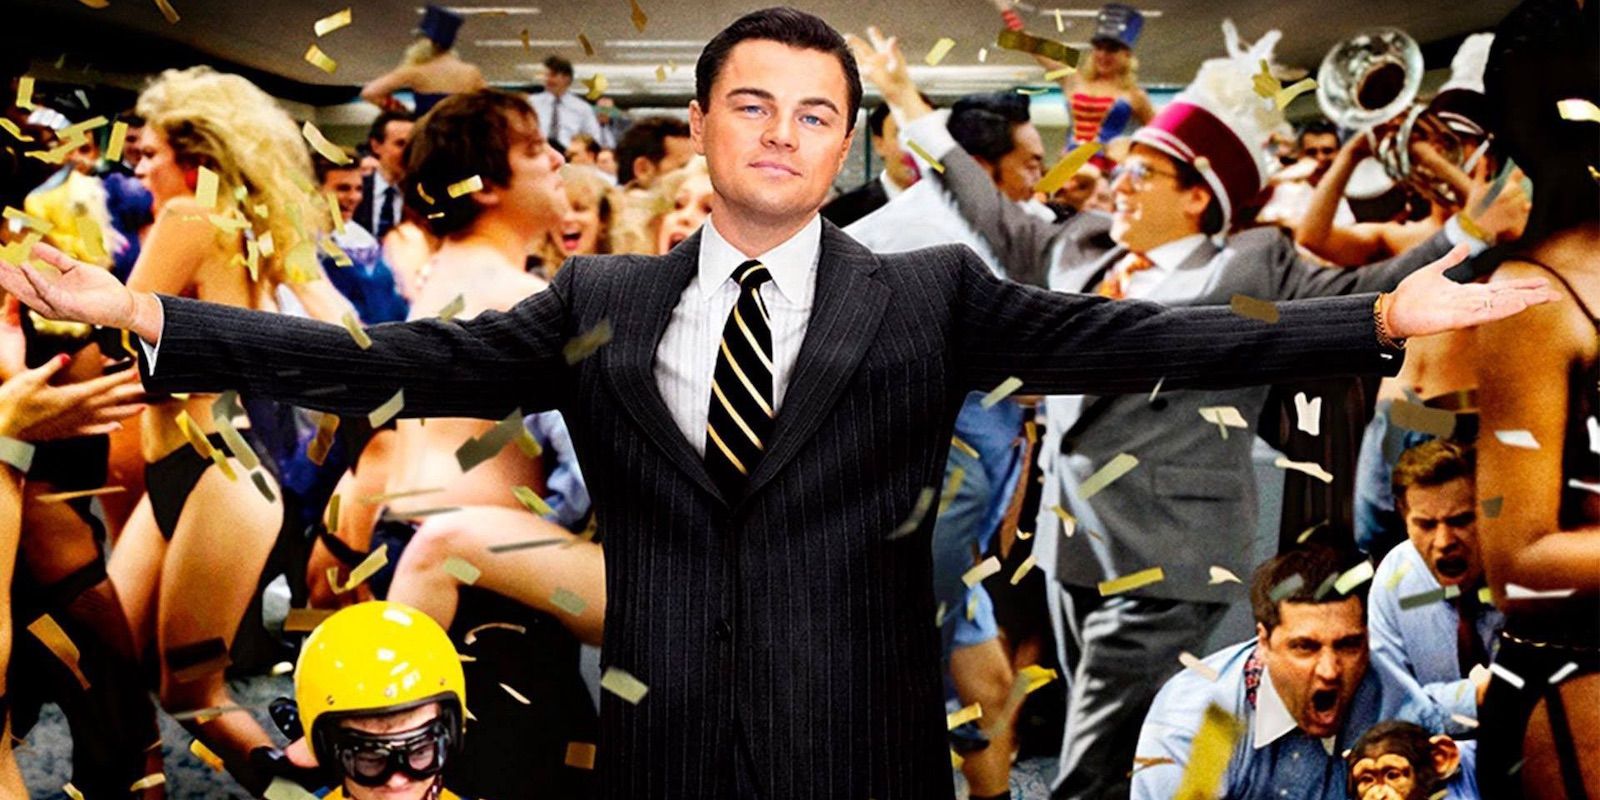 Real-life Wolf of Wall Street Suing Scorsese Movie Producers For $300M